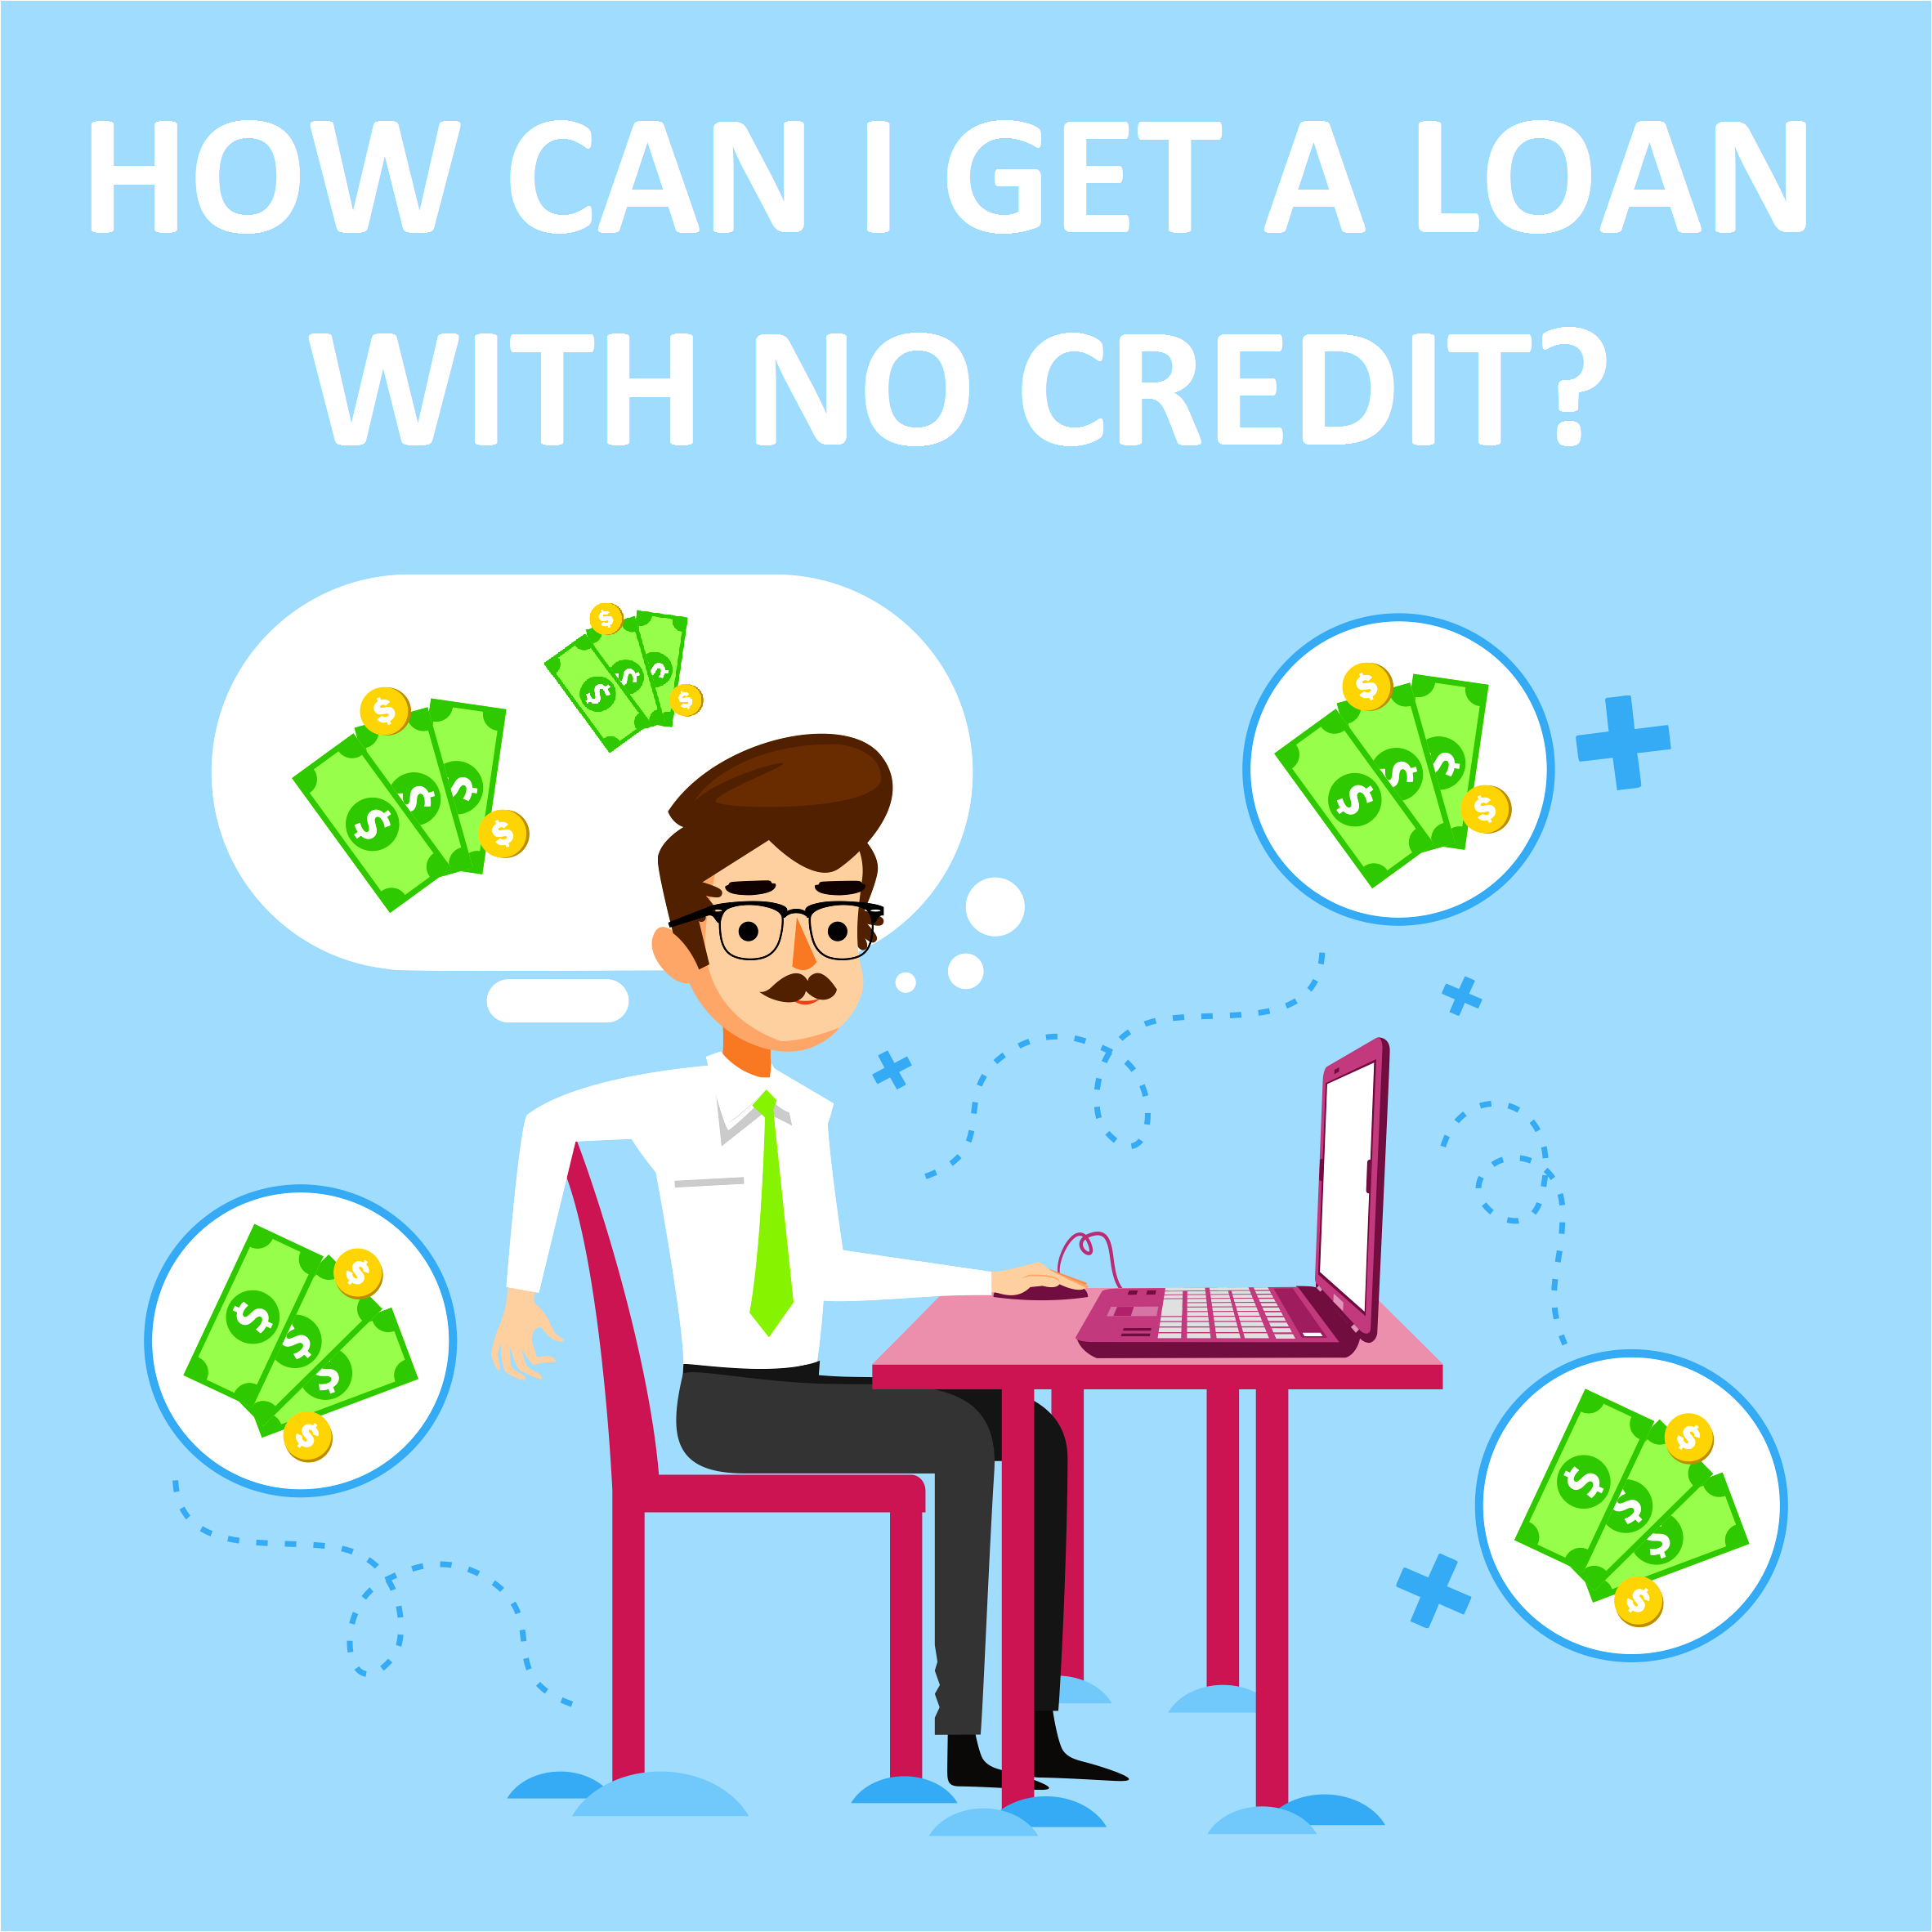 How Can I Get A 5000 Loan With No Credit?